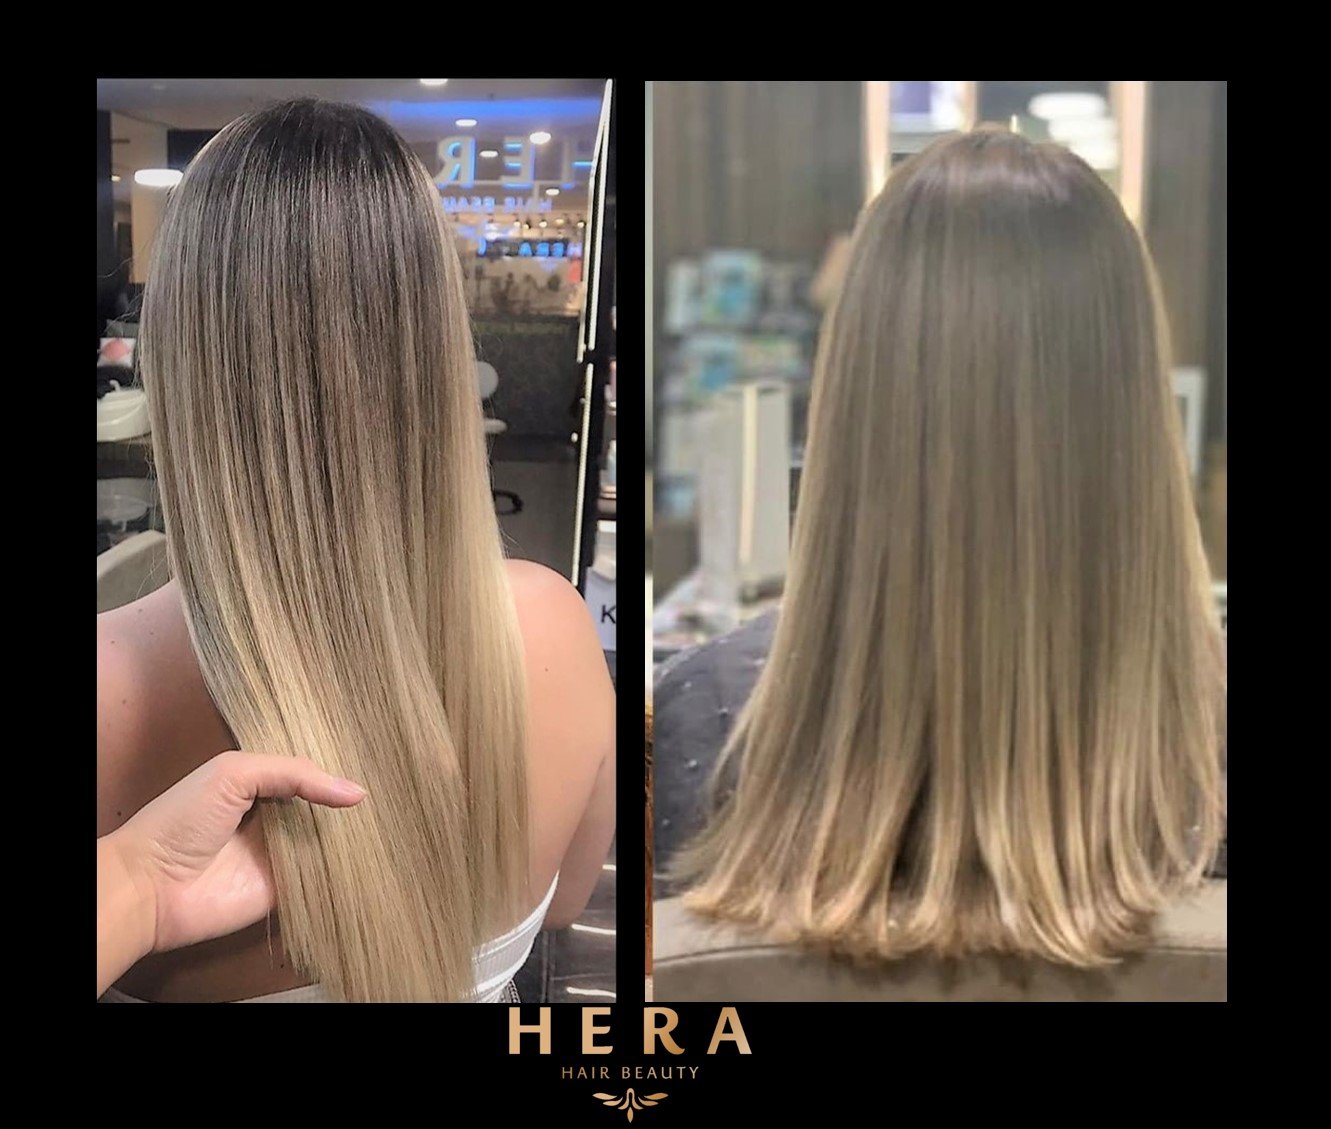 Hera's 10 Most Popular Hair Colour By Top US, UK Colorist | Hera Hair Beauty